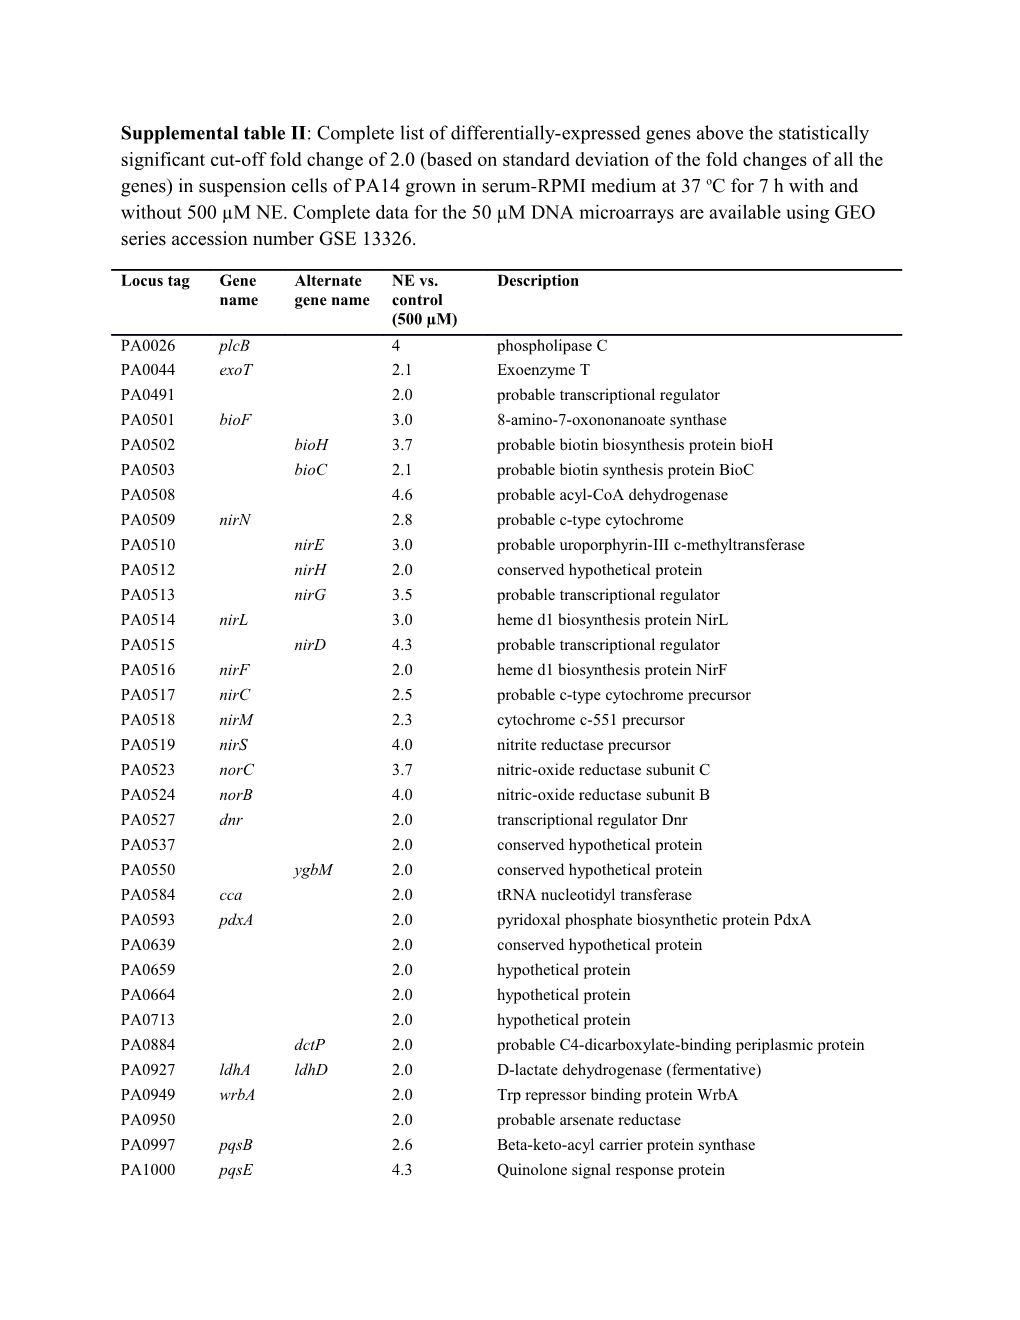 Supplemental Table II : Complete List of Differentially-Expressed Genes Above the Statistically